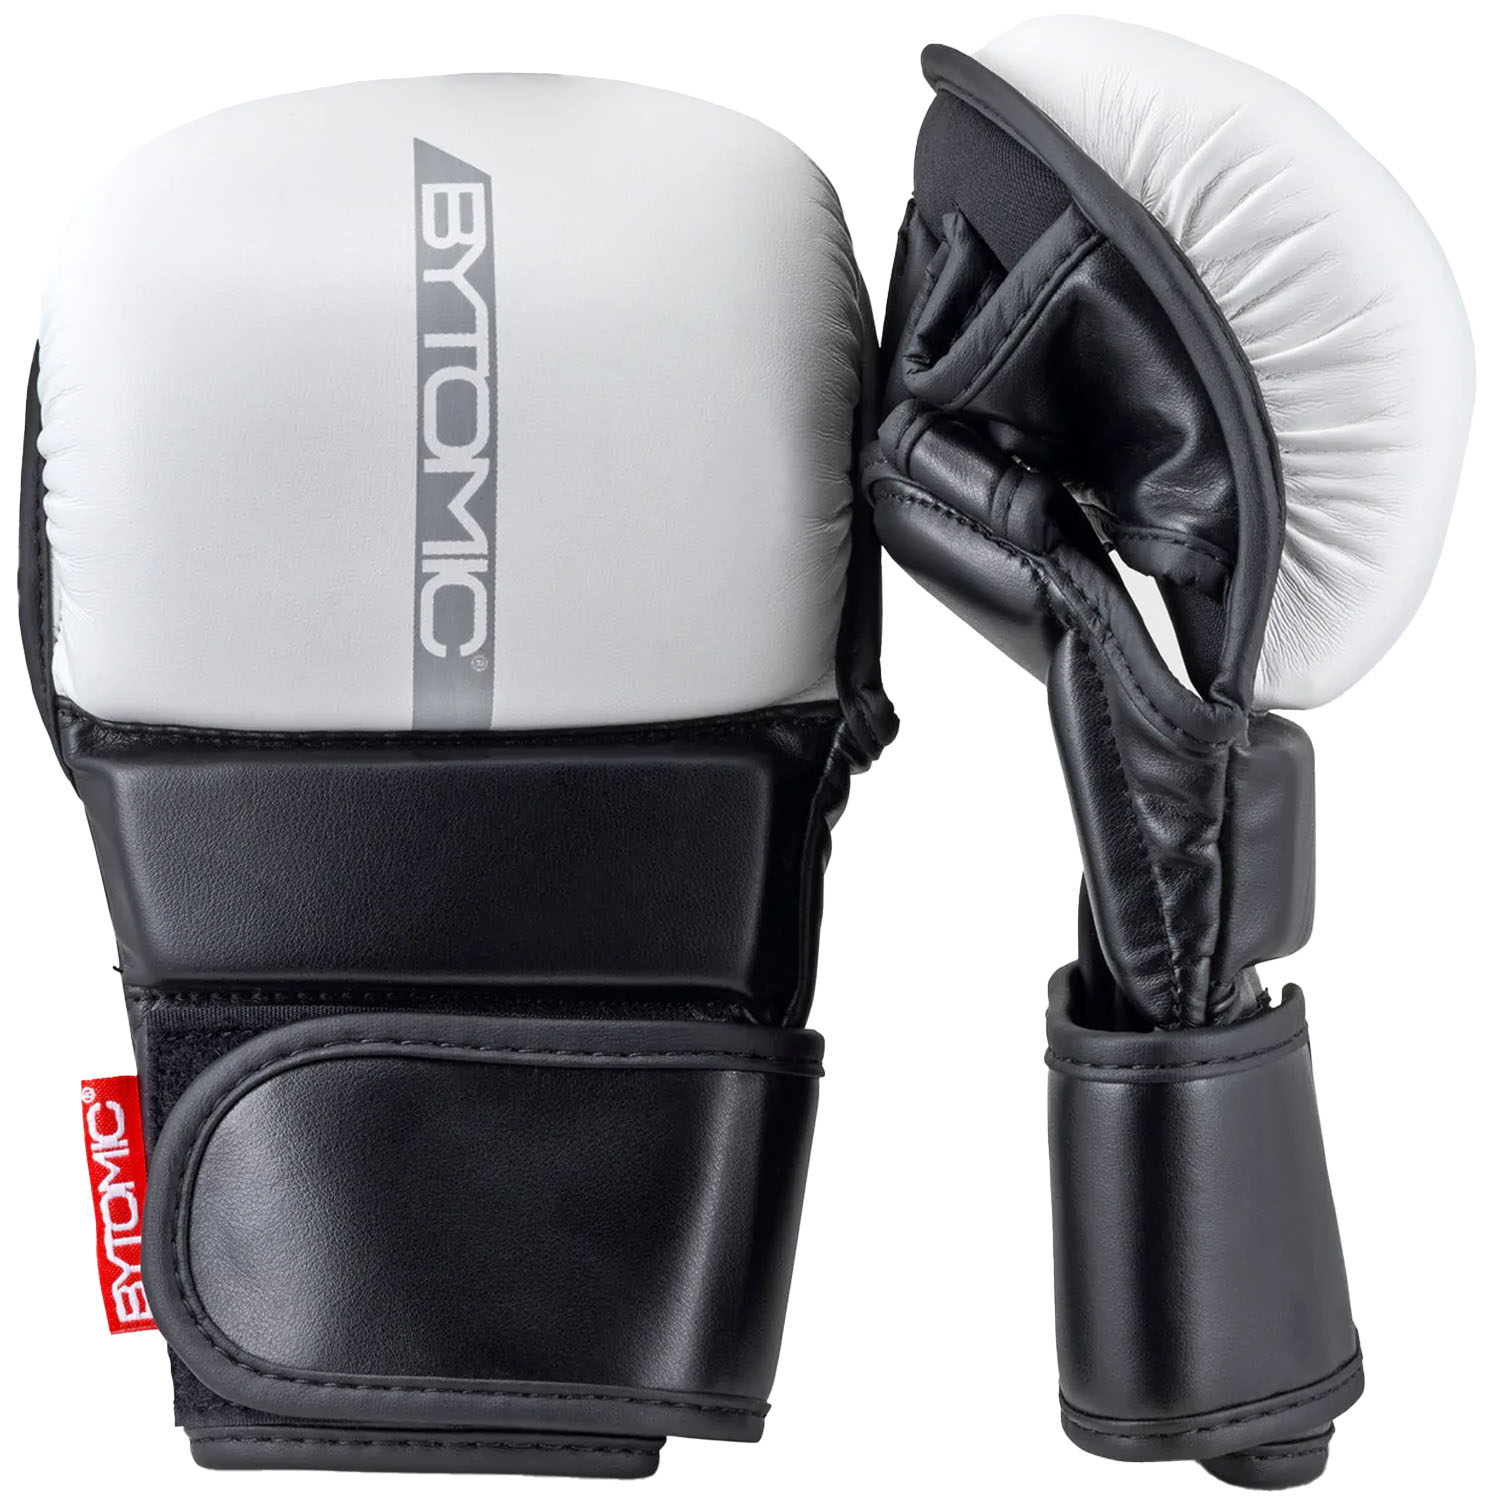 Bytomic MMA Sparring Boxhandschuhe, Red Label, weiß, S/M